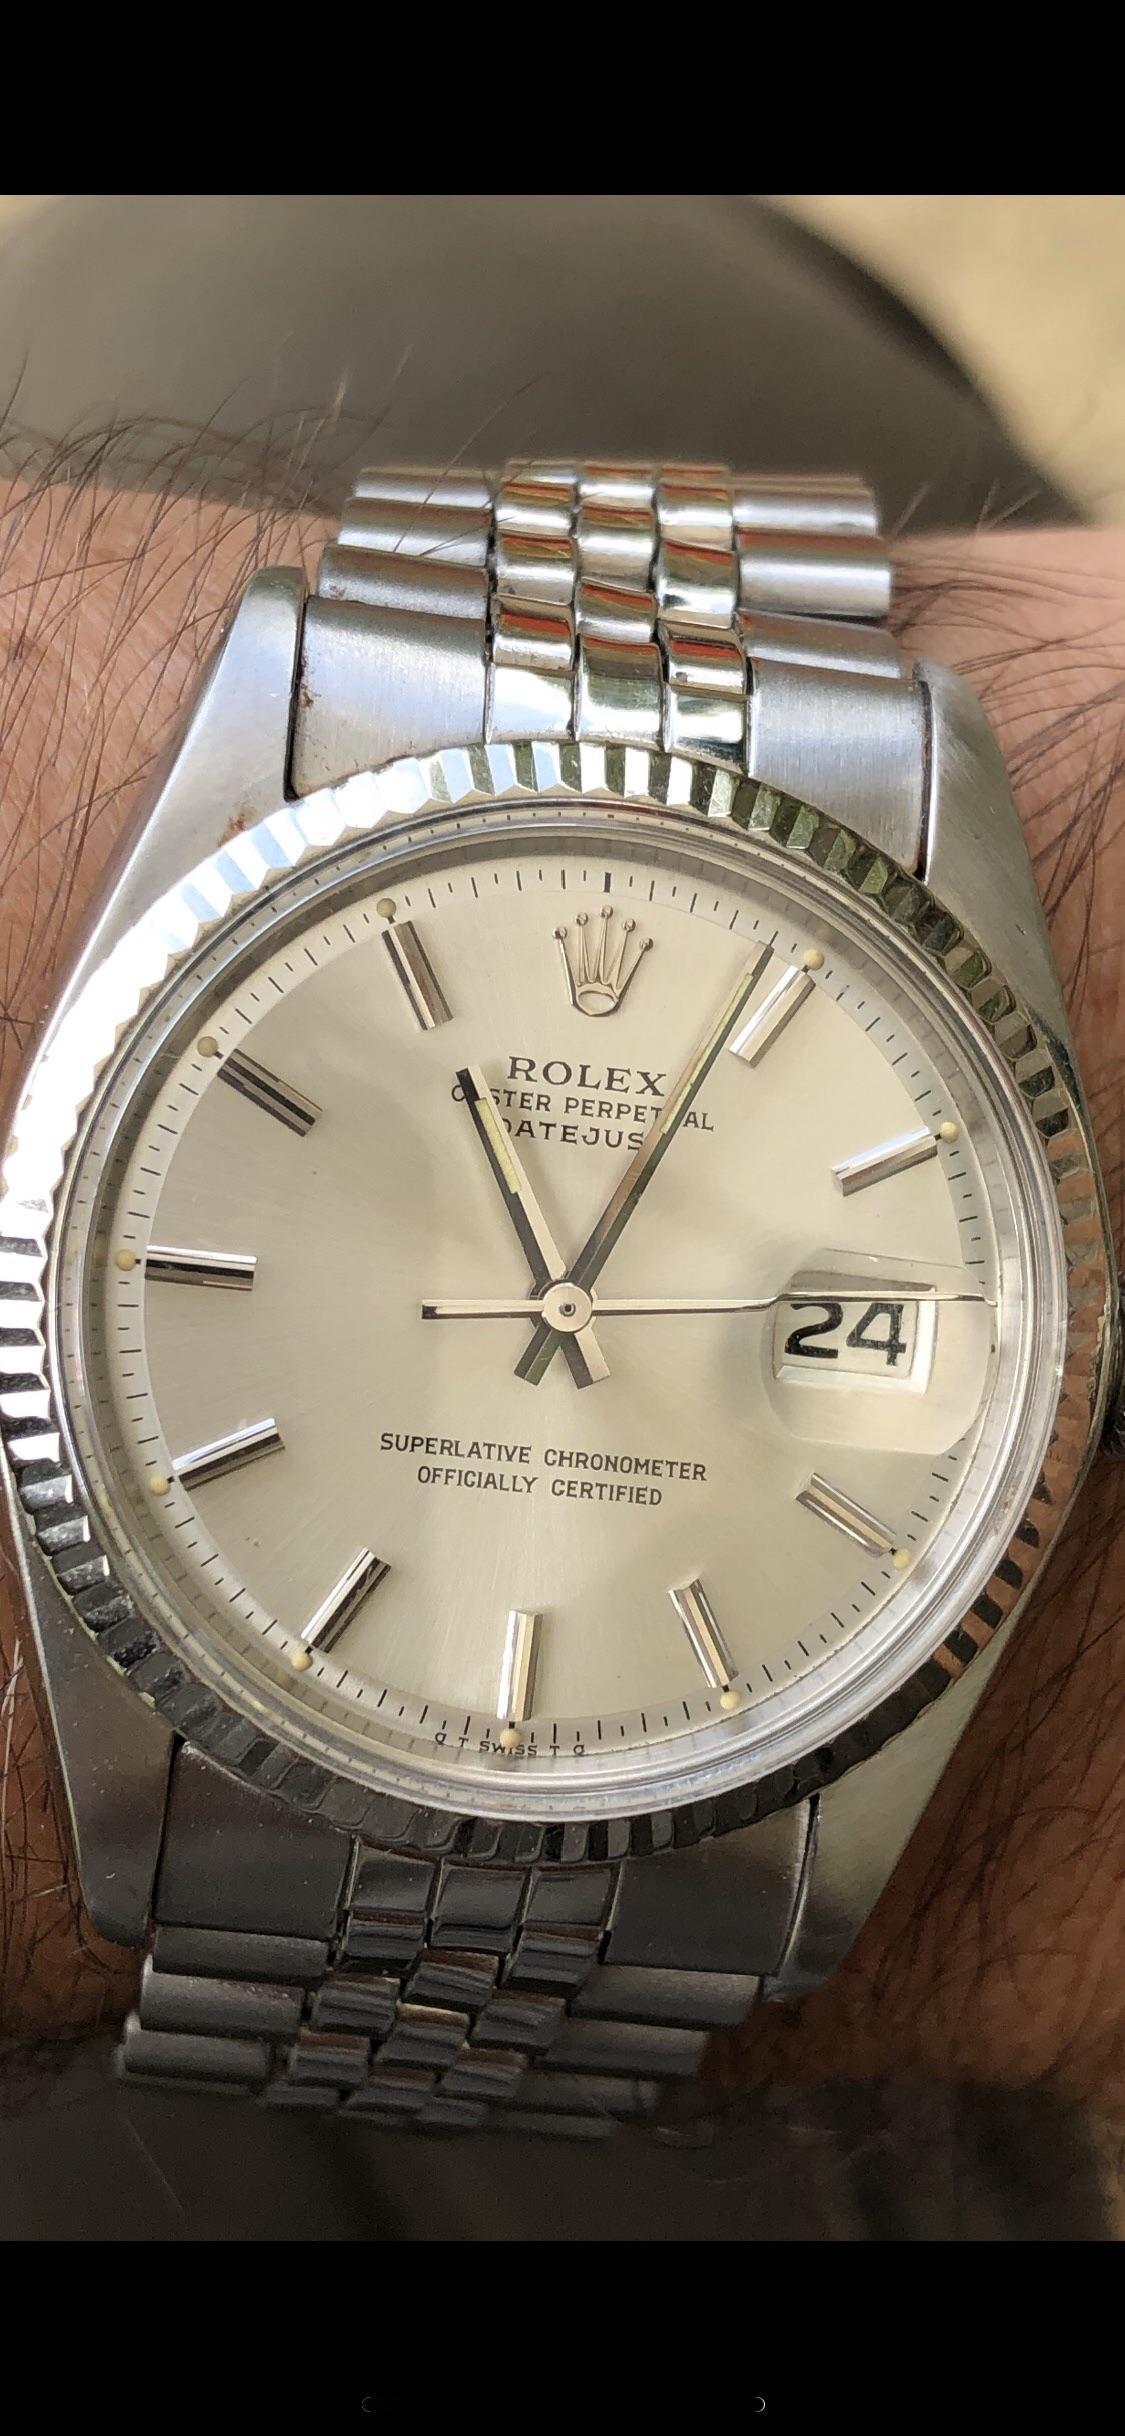 1975 Rolex Oysterdate Ref 1601 With Perfect Original Sigma Dial On Jubilee Bracelet Corr Vintage Watches